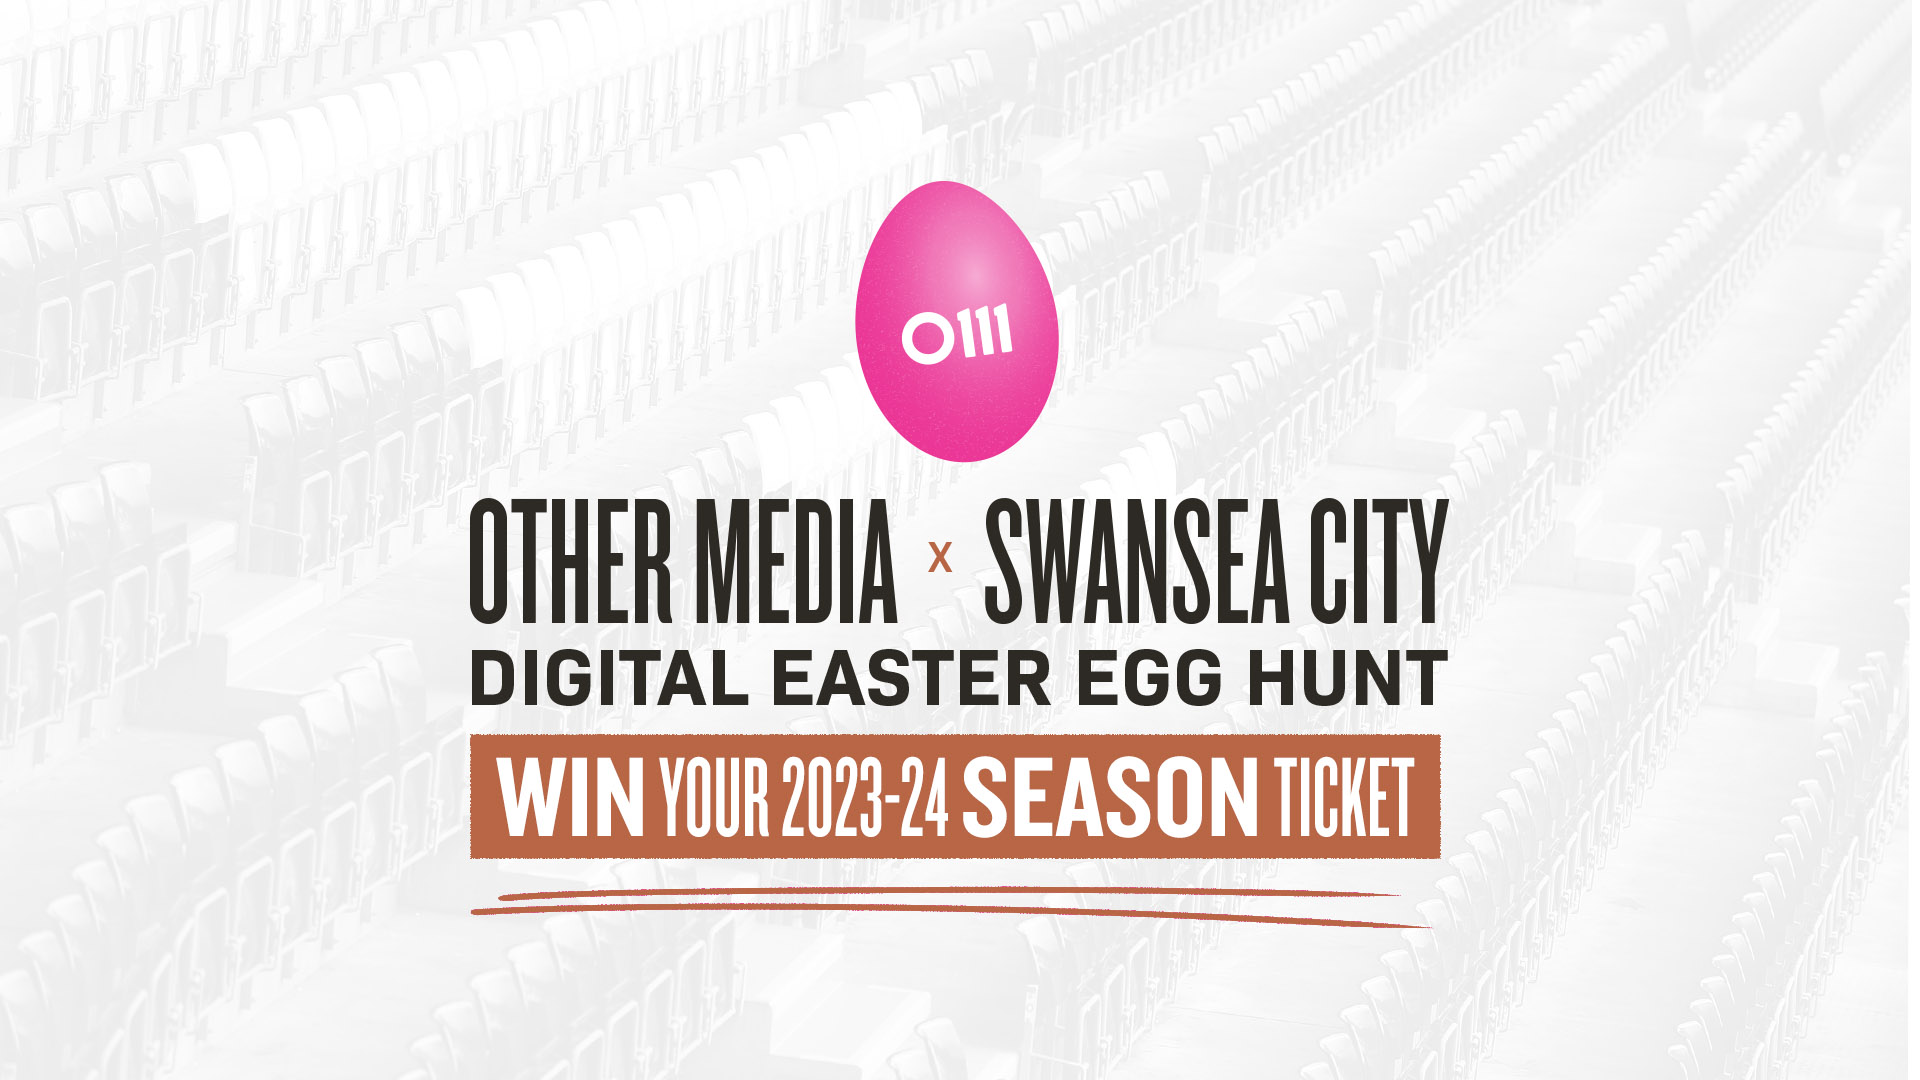 Win your 2023-24 season ticket with the Other Media and Swansea City Digital Easter Egg Hunt